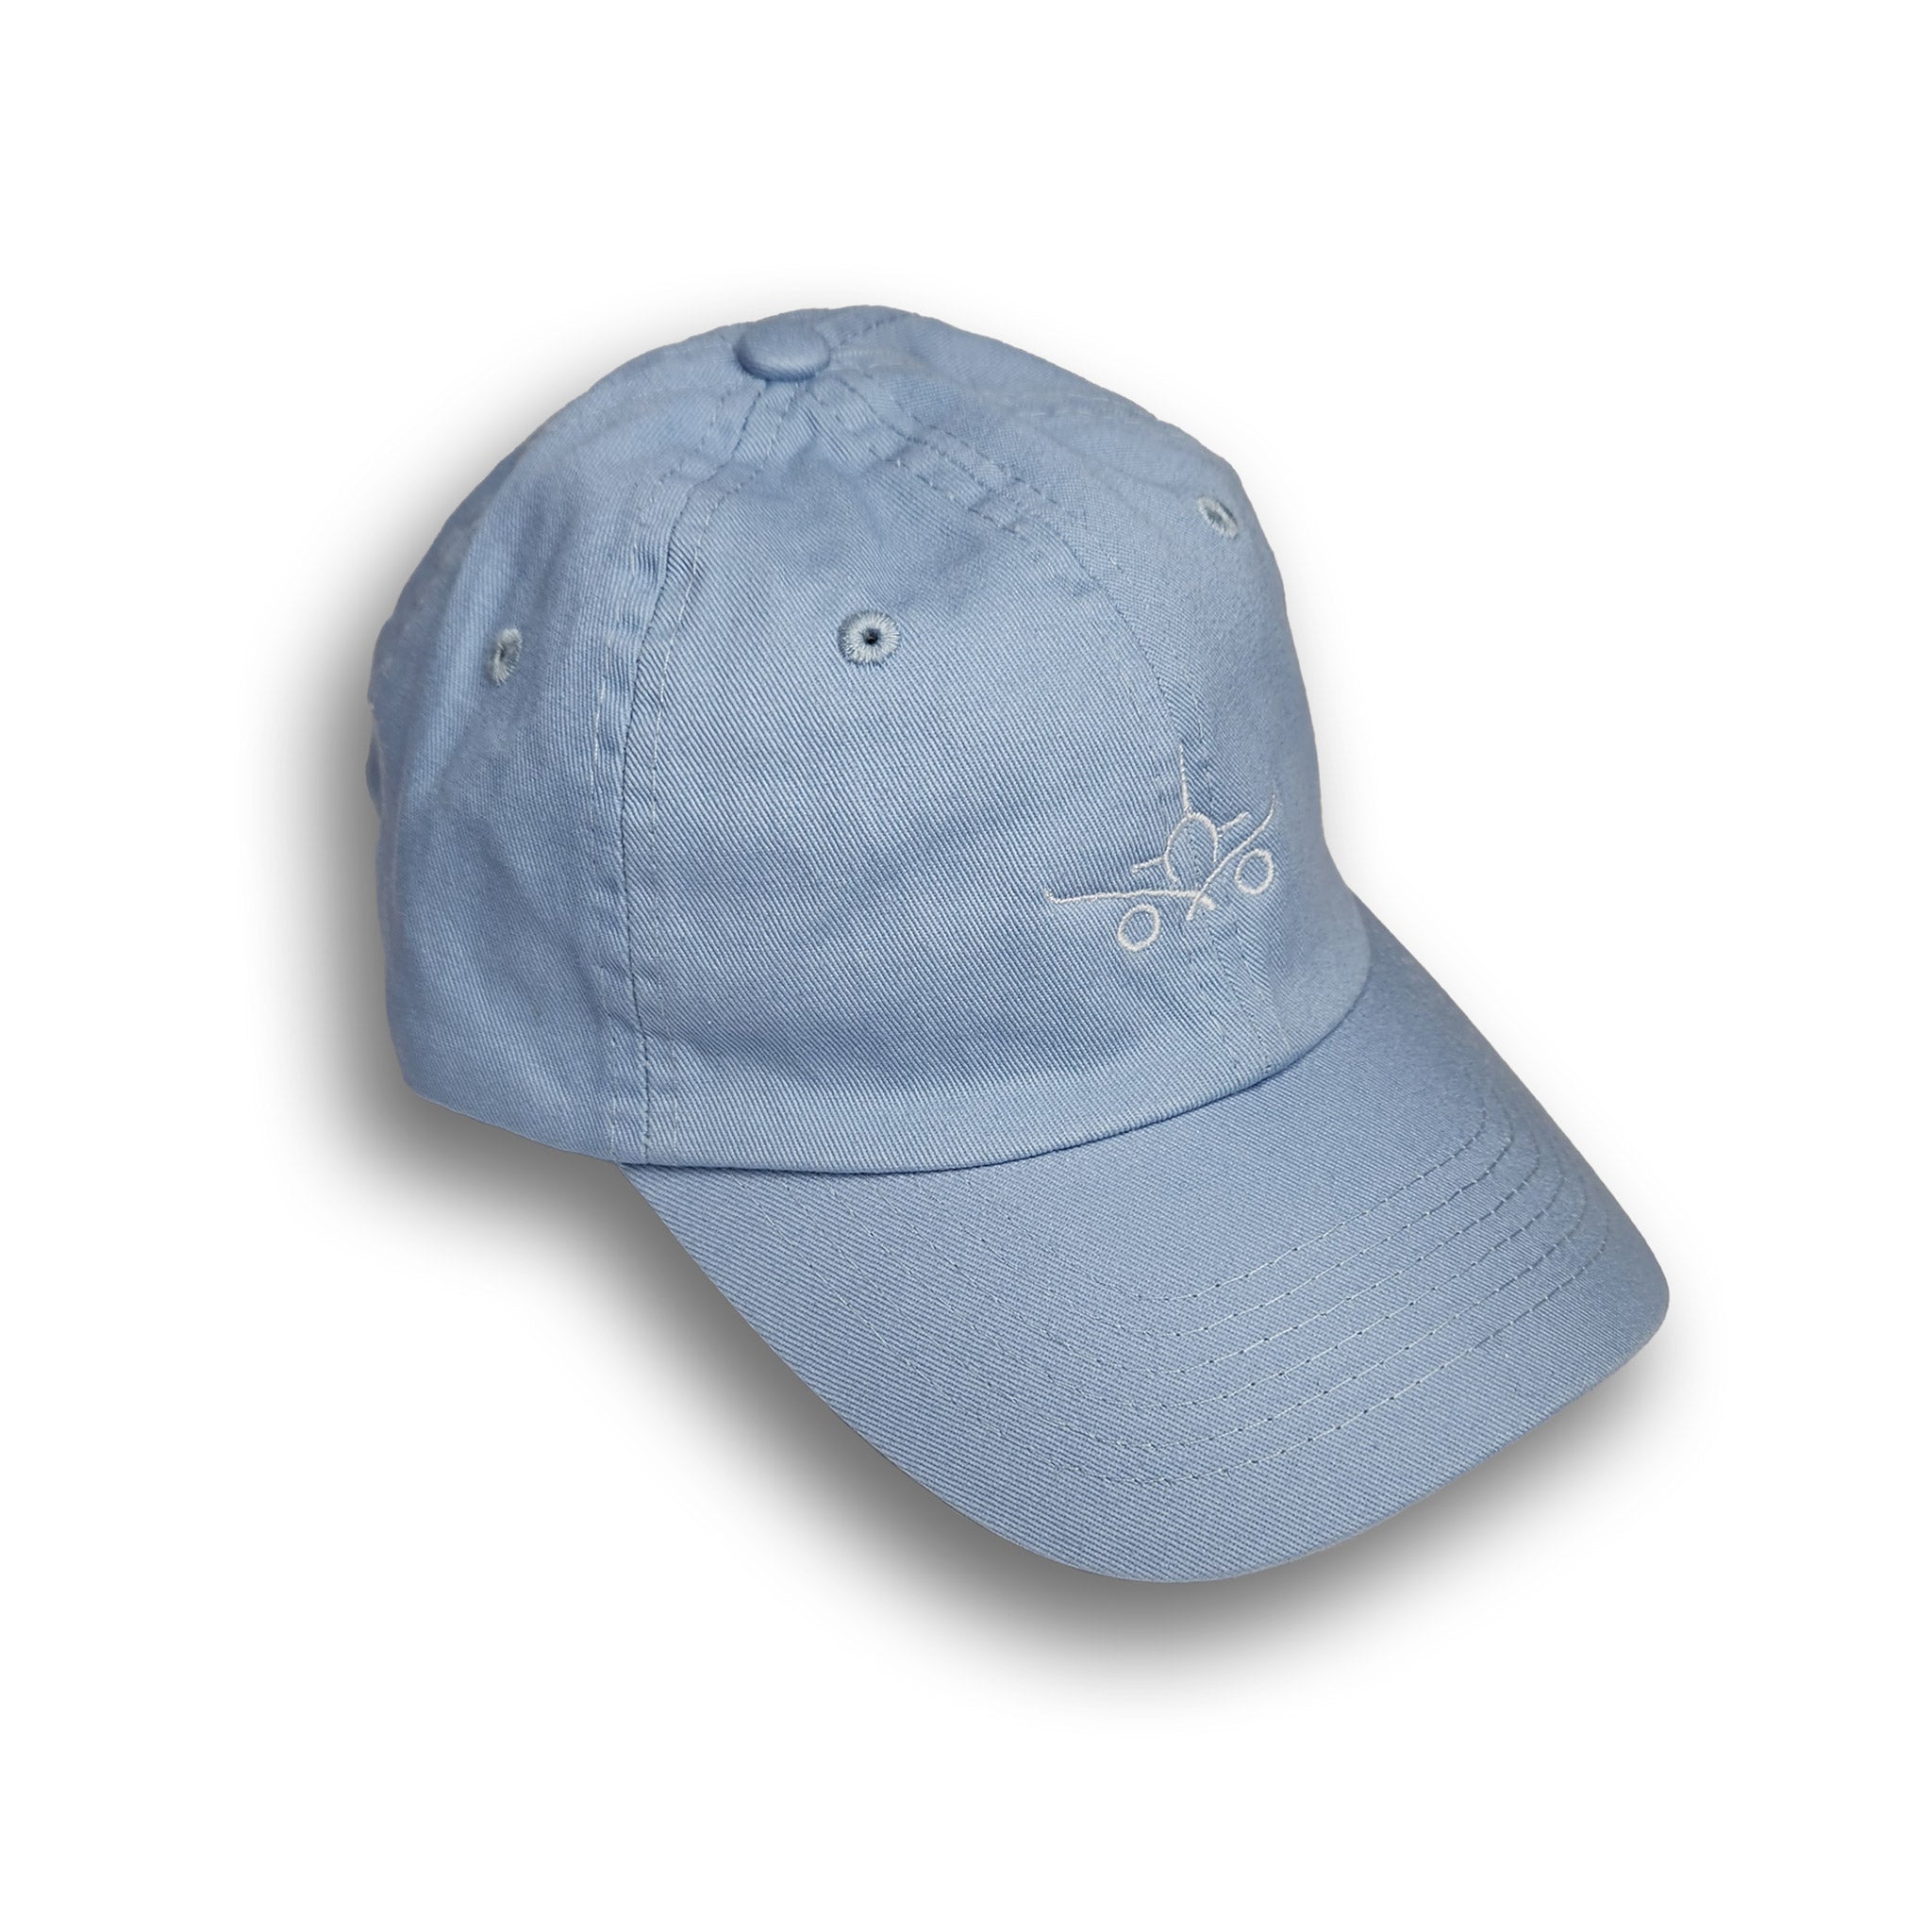 "Skyway" - Unstructured Ultra Blue Aviation Dad Cap w/ White Embroidered Logo